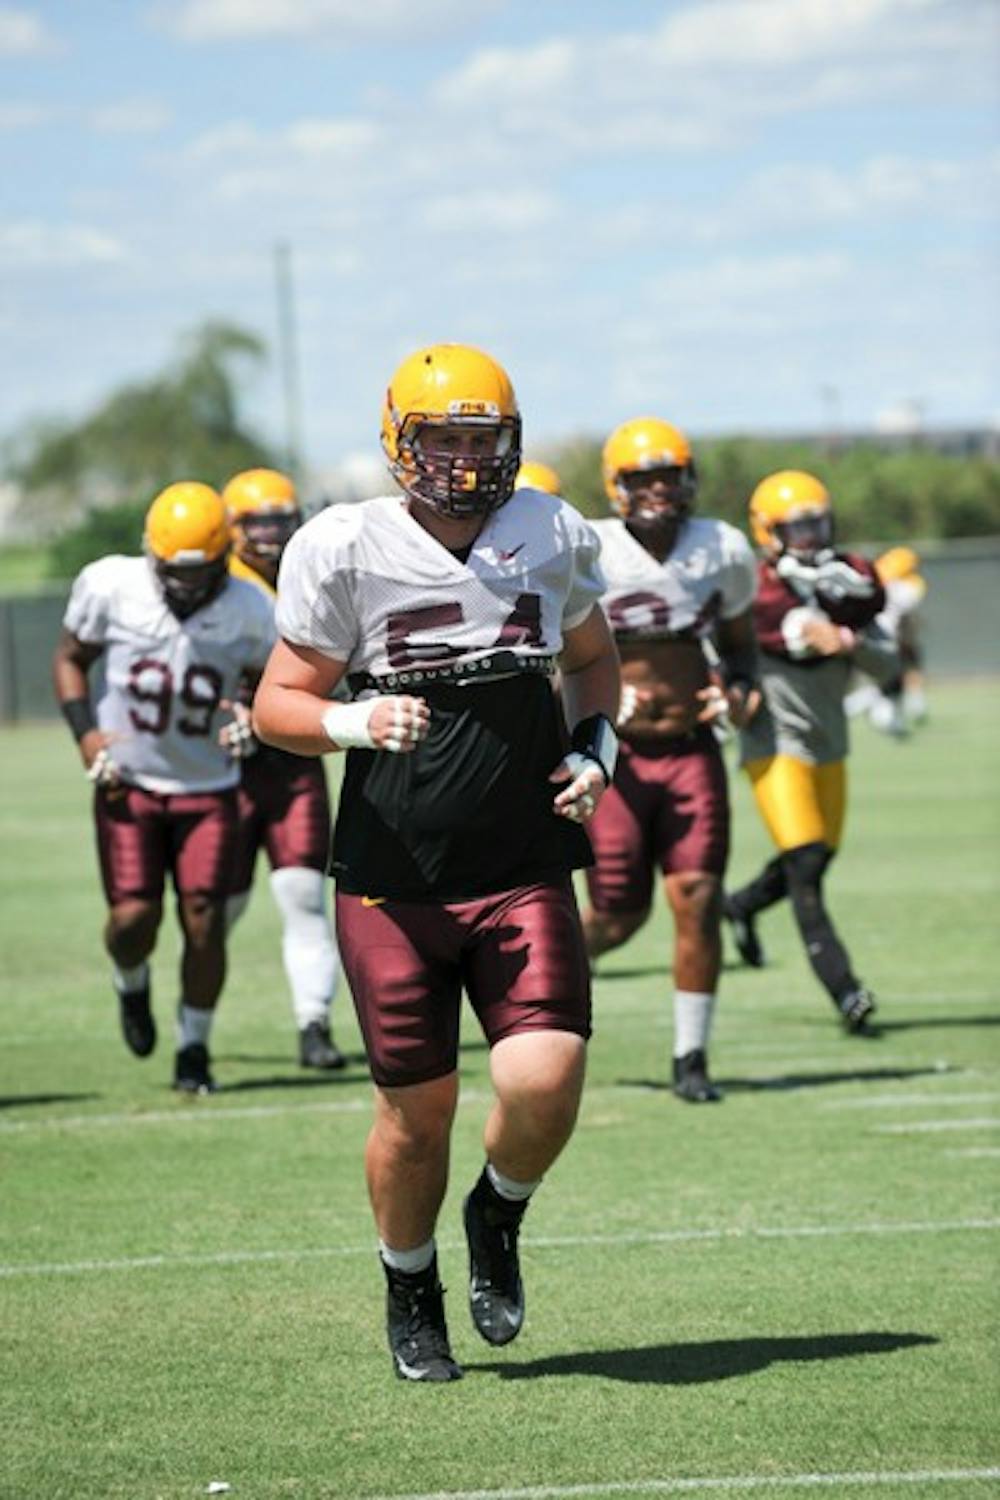 Freshman defensive lineman Connor Humphreys returns to the line after a play during a practice in Tempe. (Photo by Andrew Ybanez)